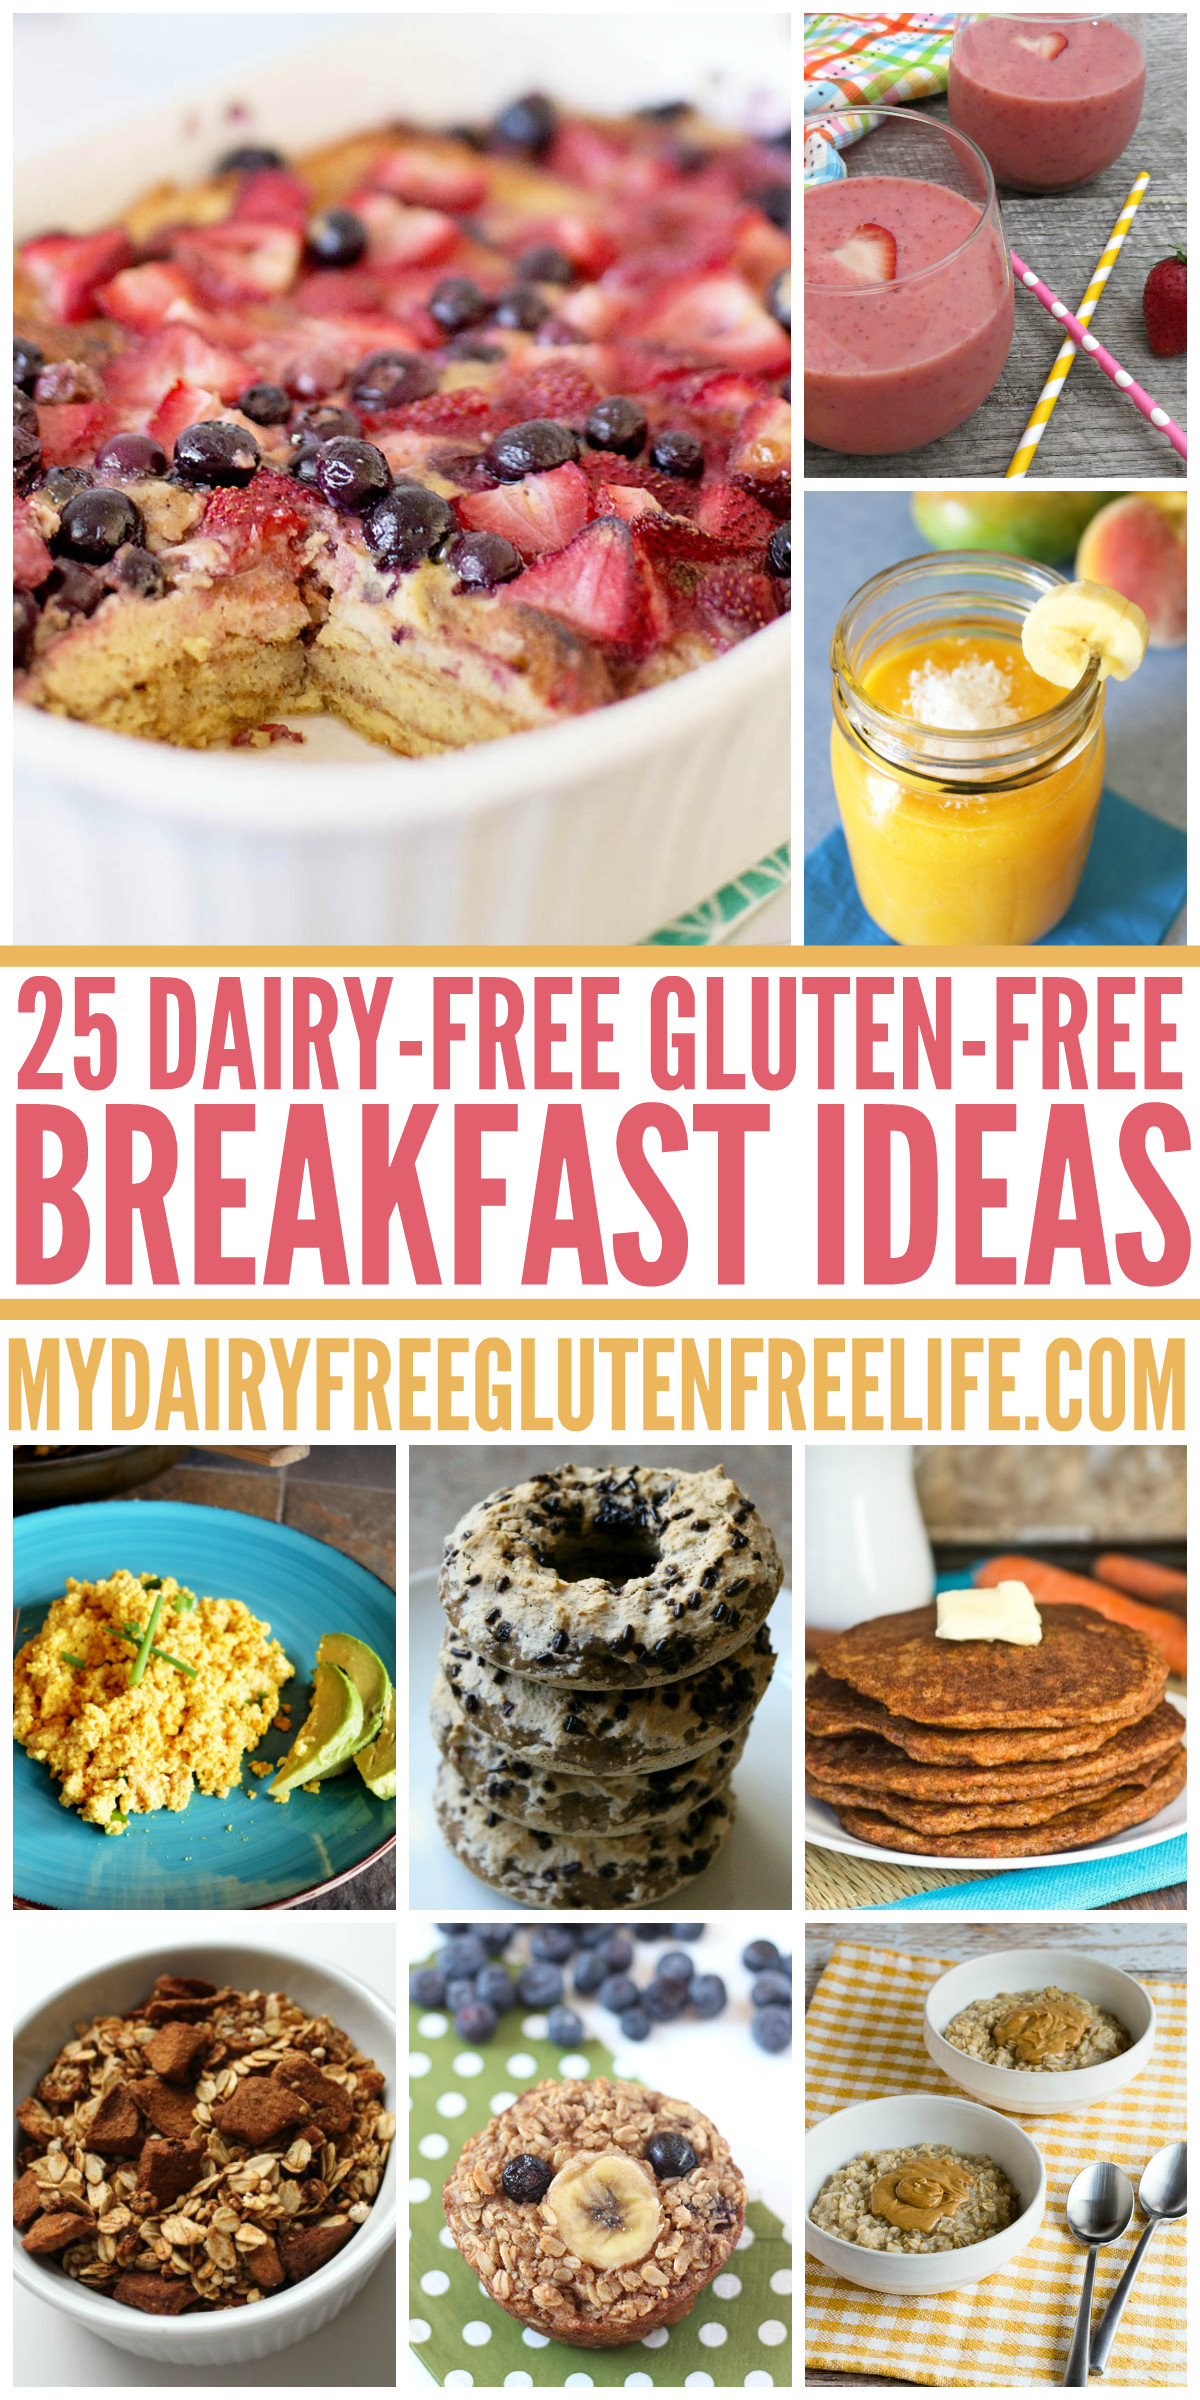 Gluten And Dairy Free Breakfast Recipes 25 Dairy Free Gluten Free Breakfast Ideas My DairyFree